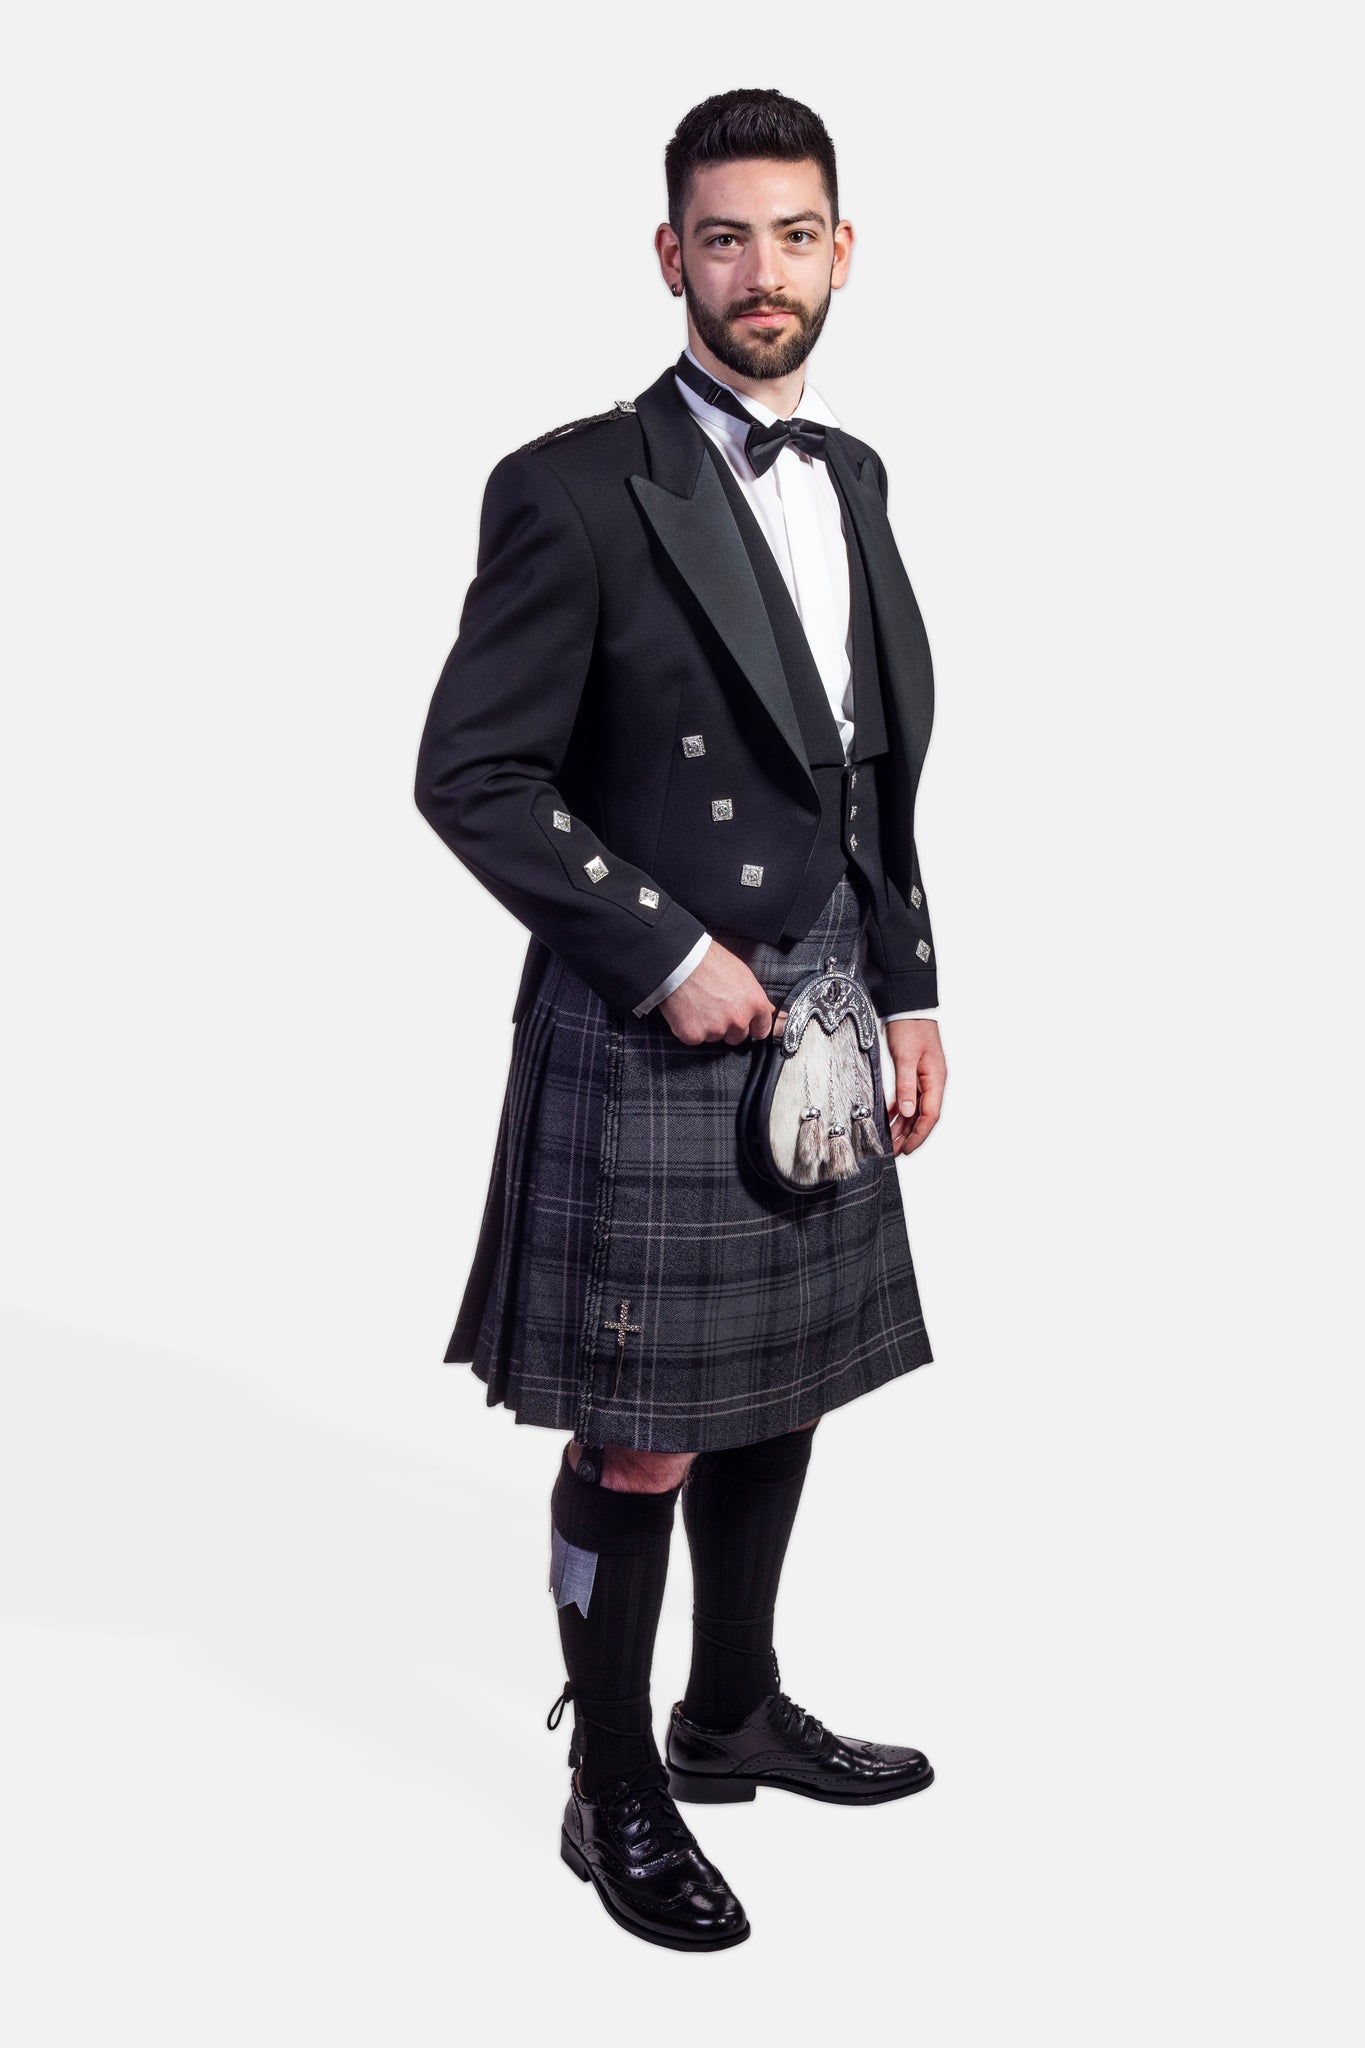 Highland Granite / Prince Charlie Hire Outfit